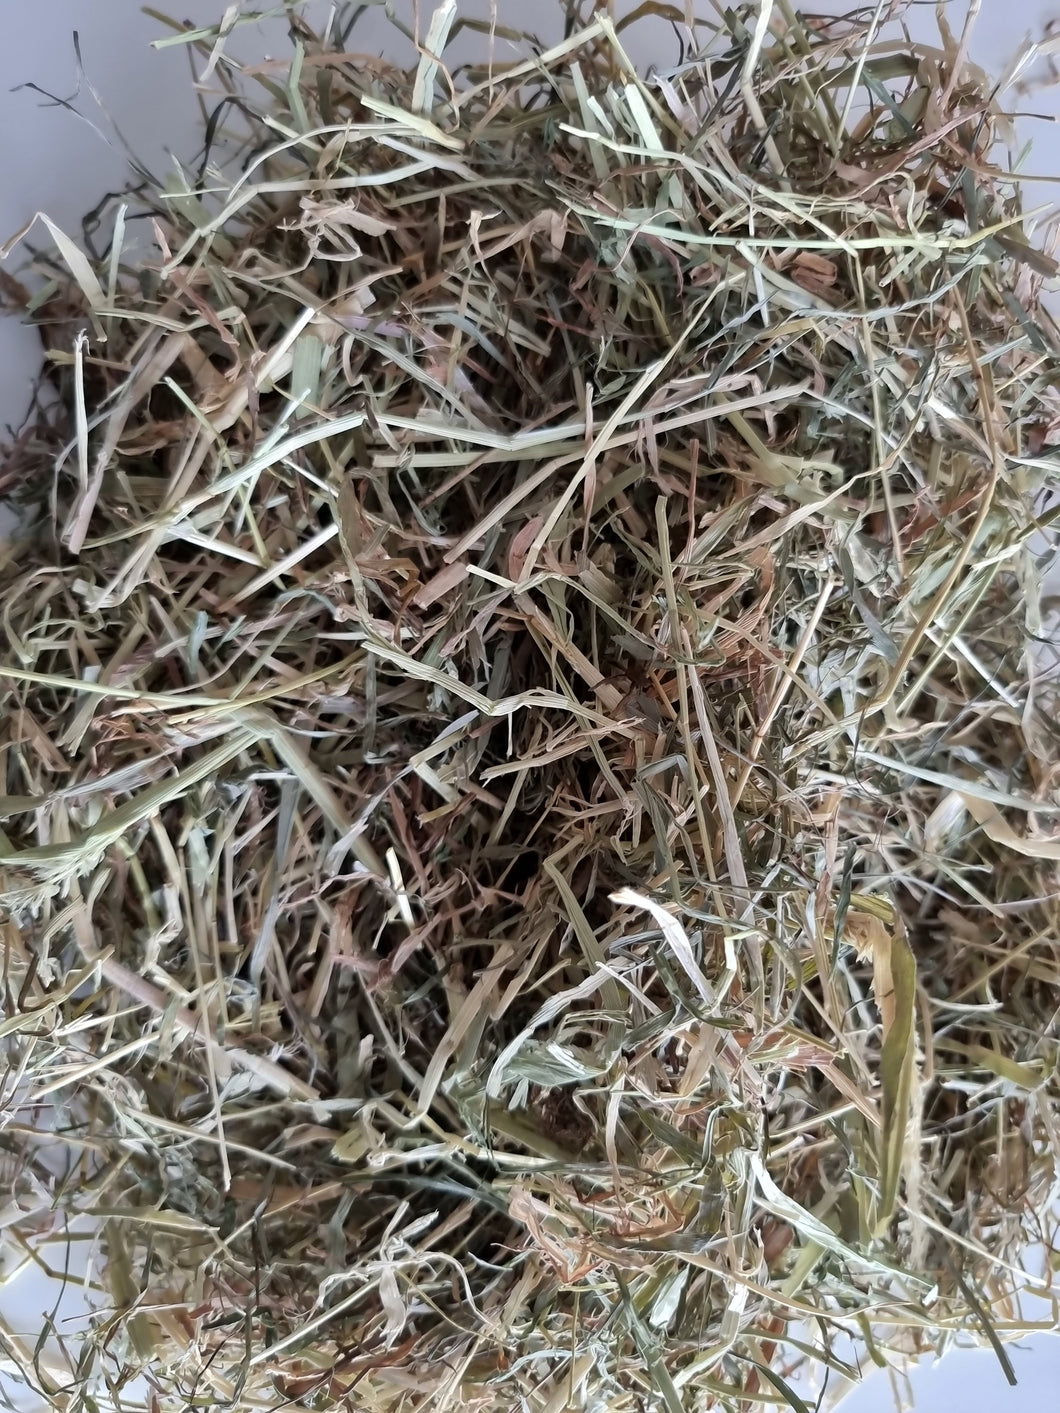 Wild About Bunnies Pick and Mix Hay Boxes (Timothy/Wild Meadow/Orchard/Premium Meadow)